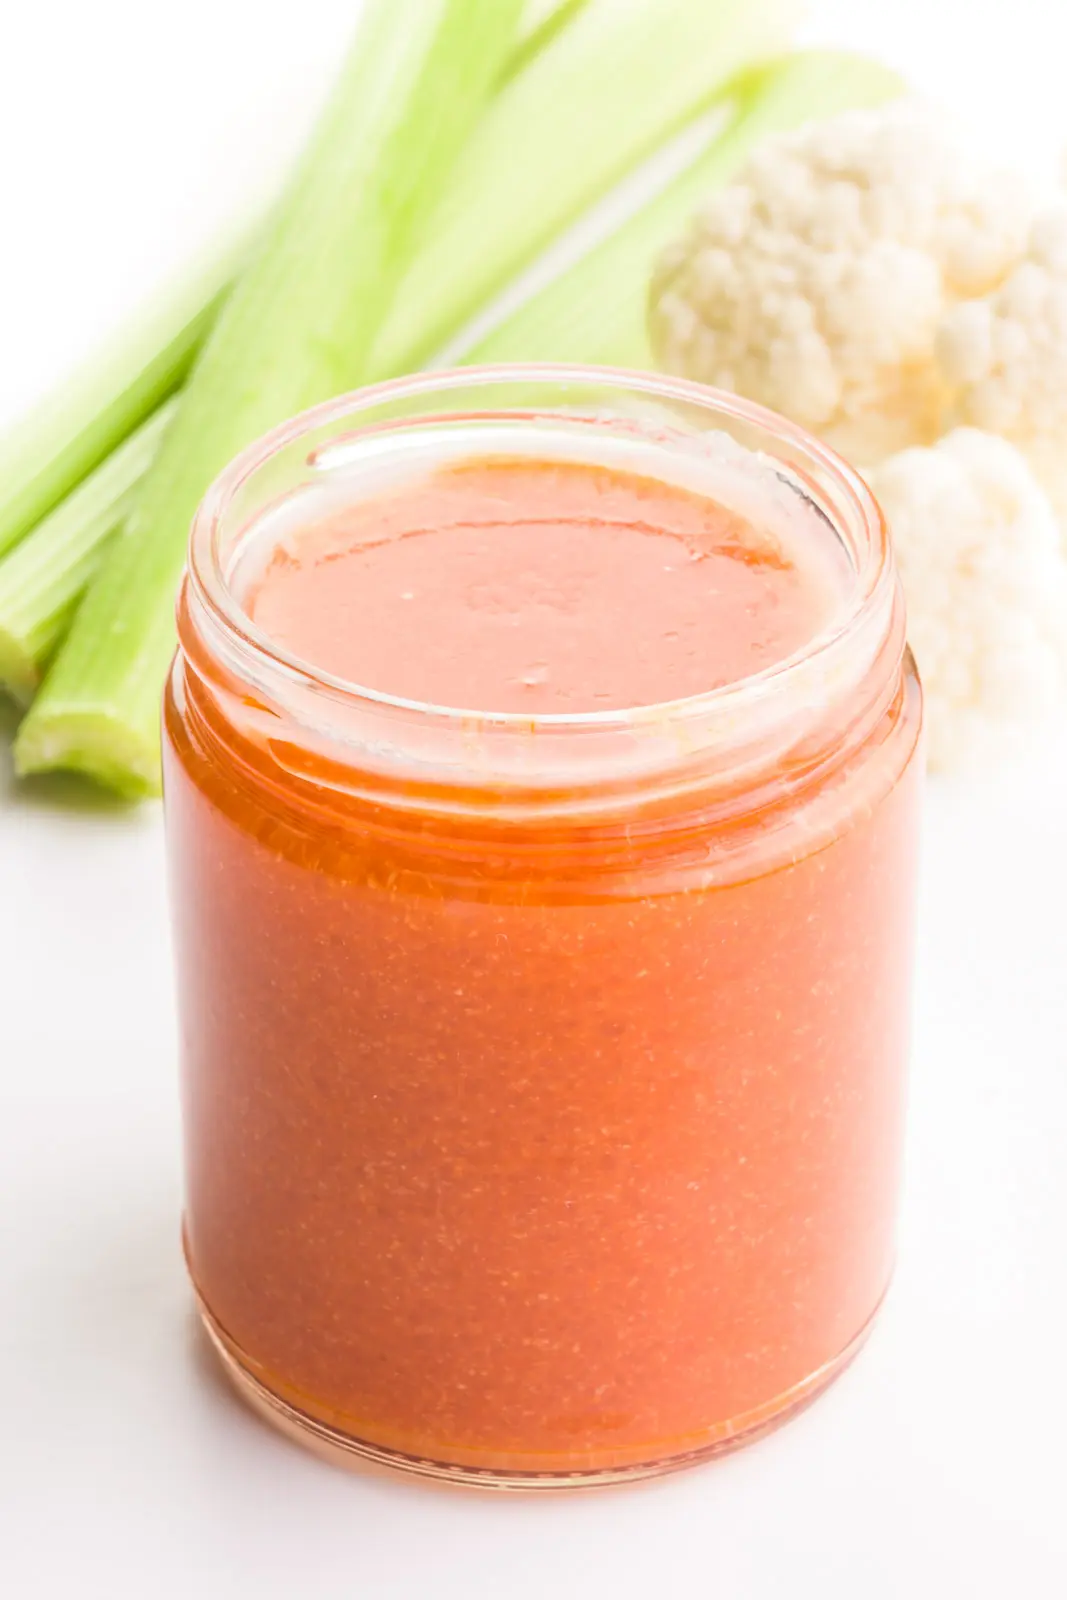 Vegan buffalo sauce is in a glass jar. There are stalks of celery and cauliflower in the background.